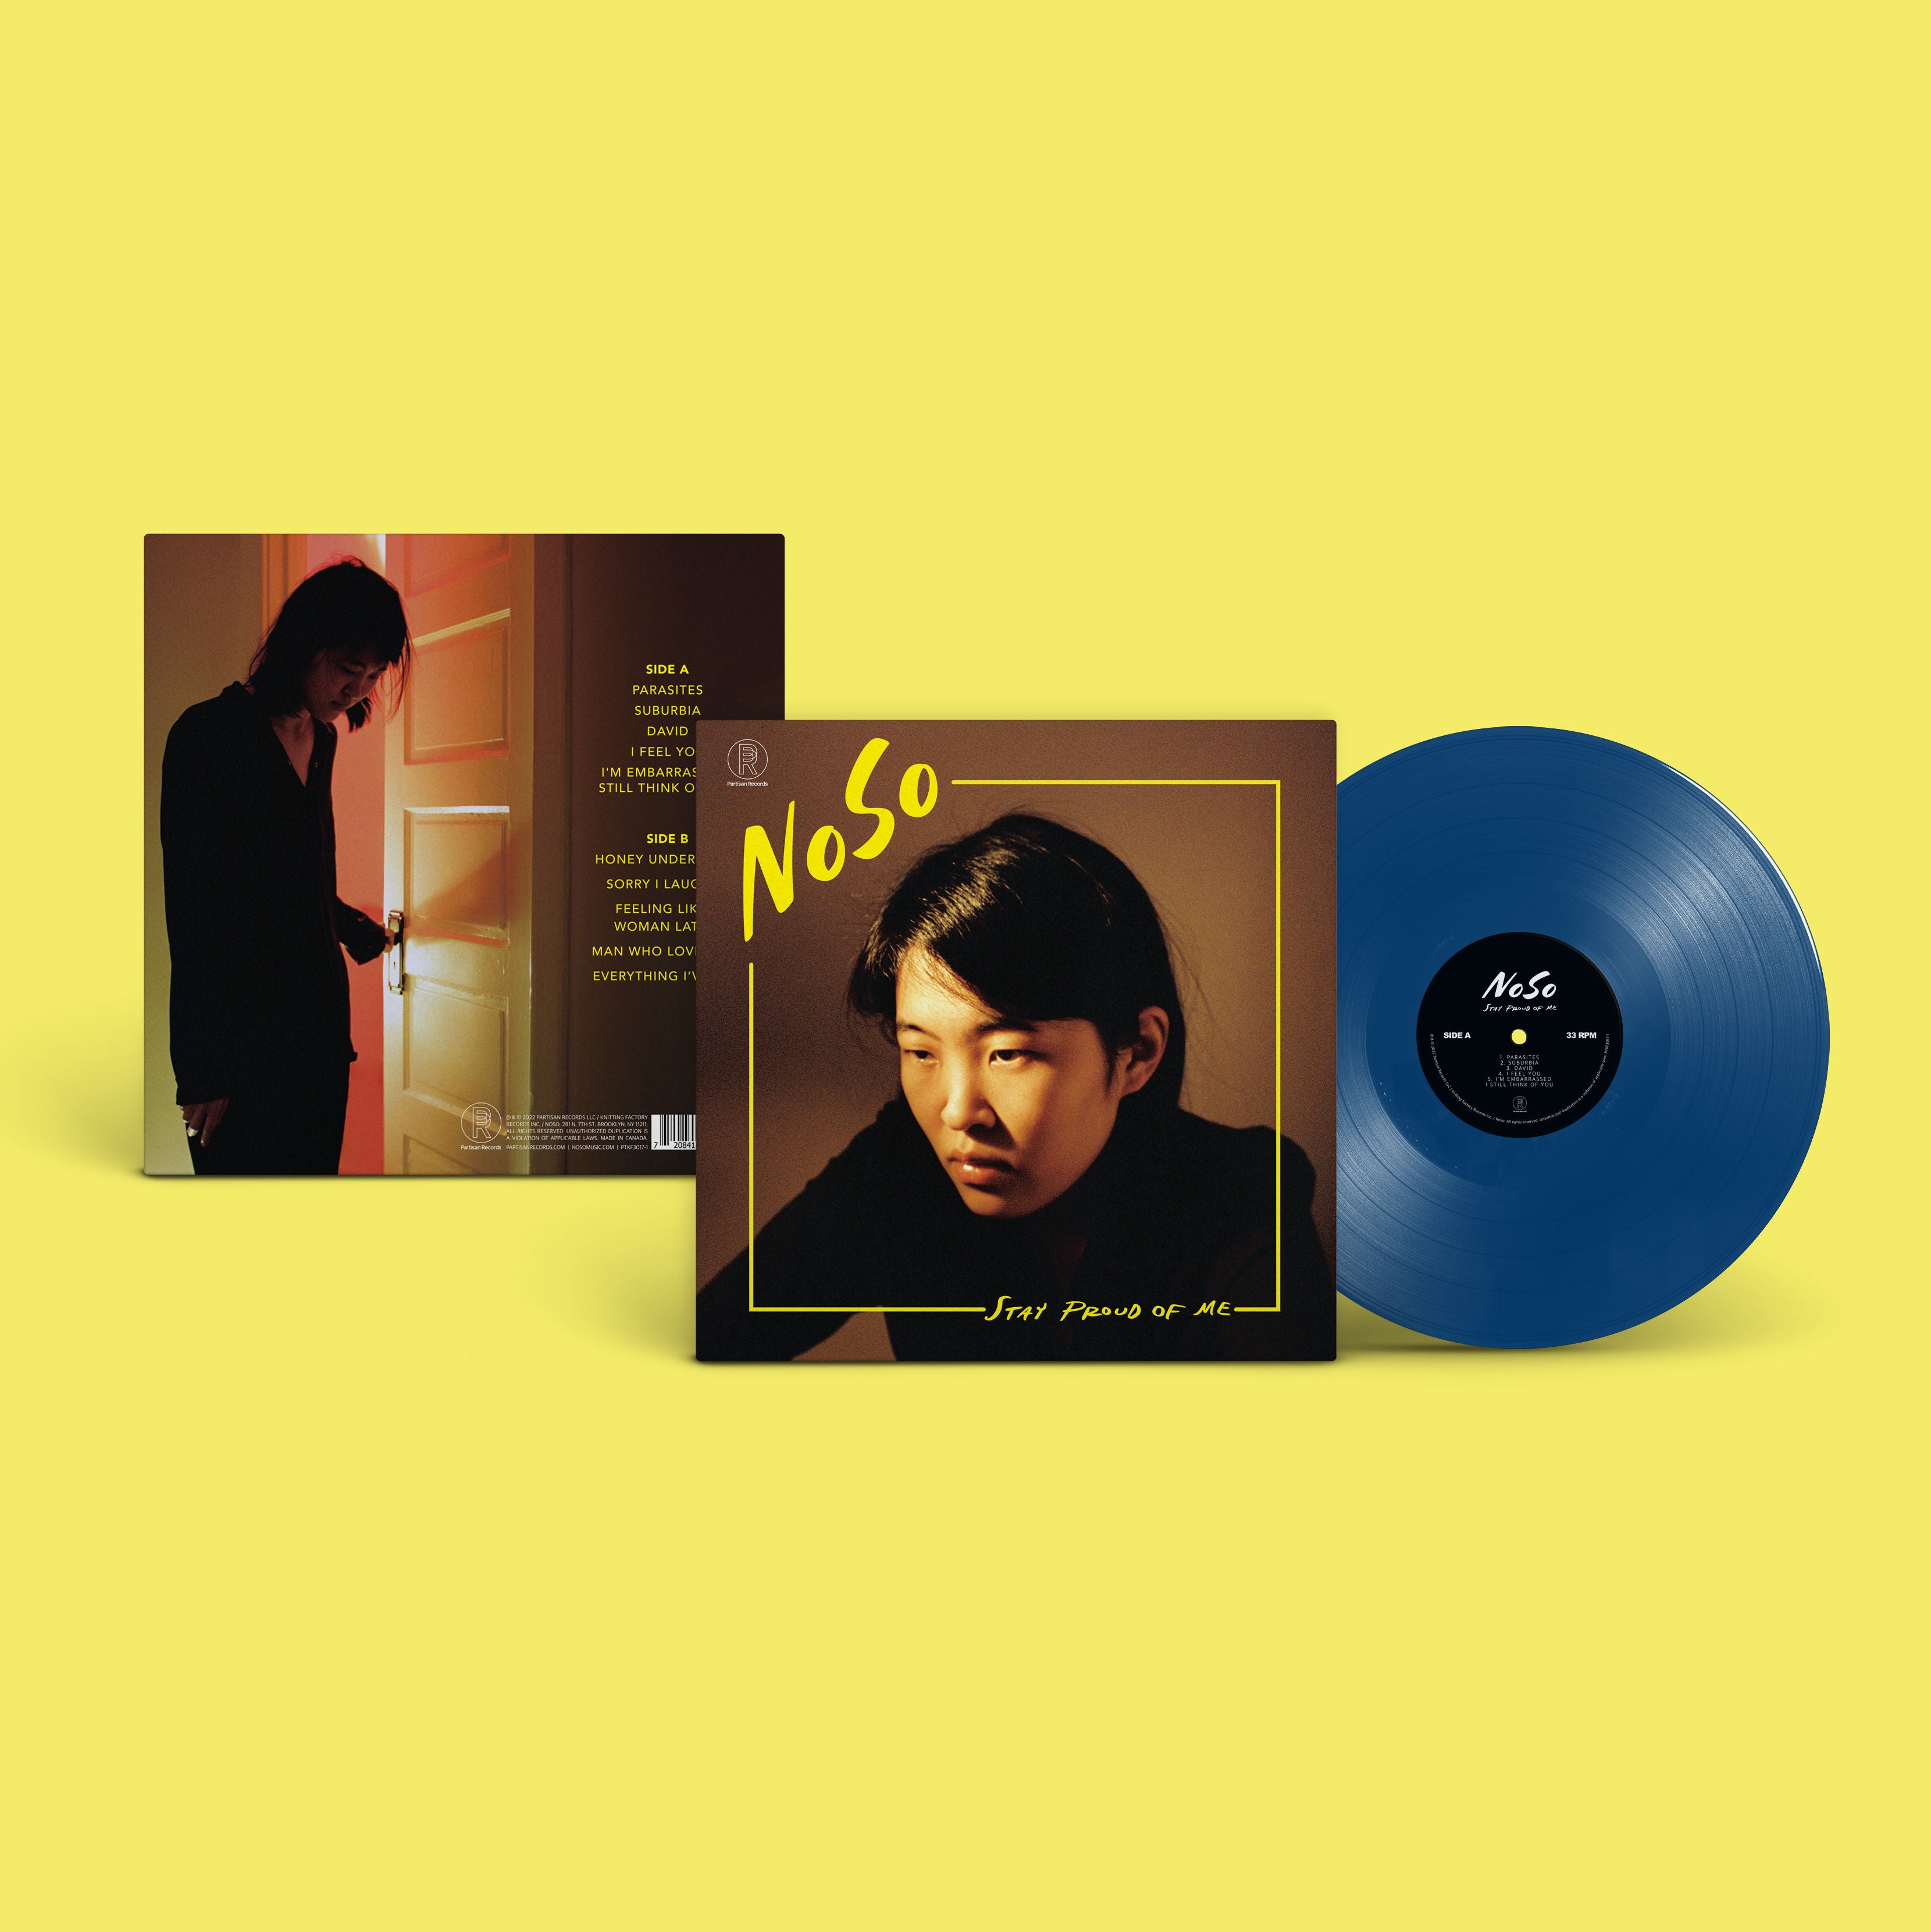 Stay Proud Of Me: Limited Edition Blue Vinyl LP